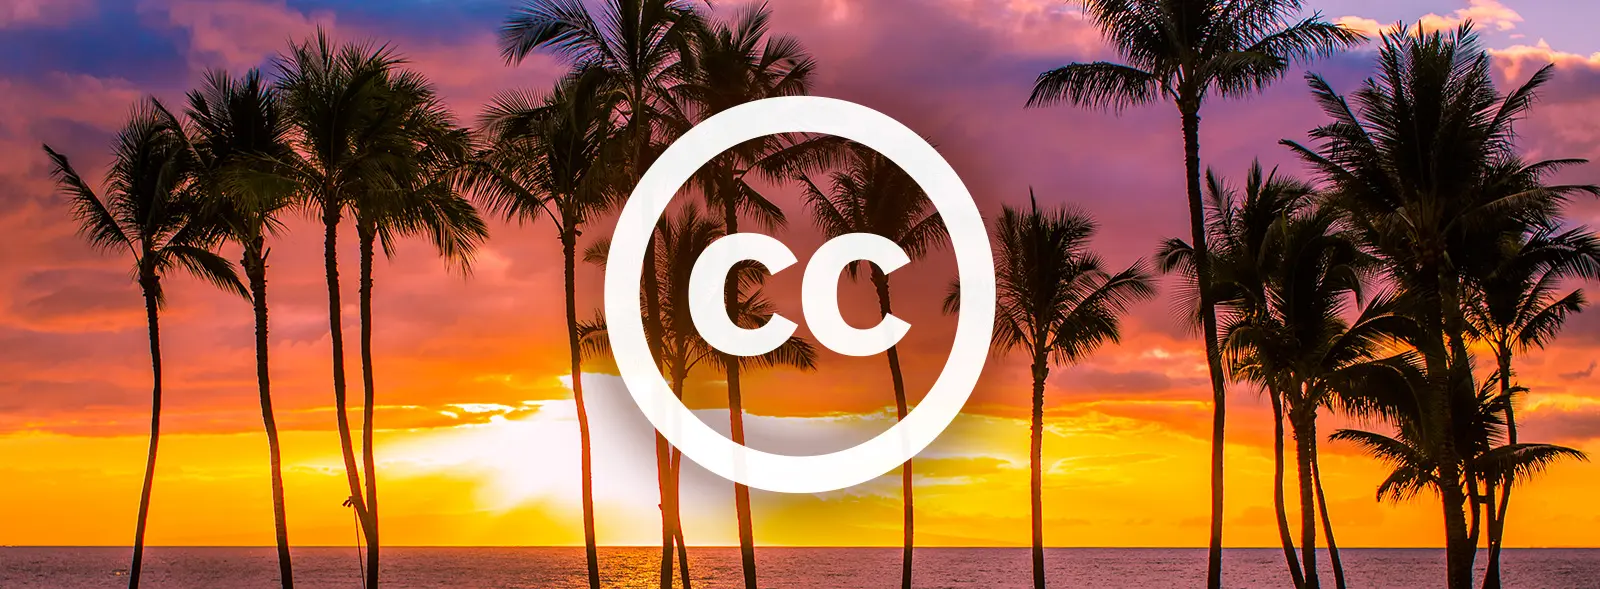 An image of Creative Commons